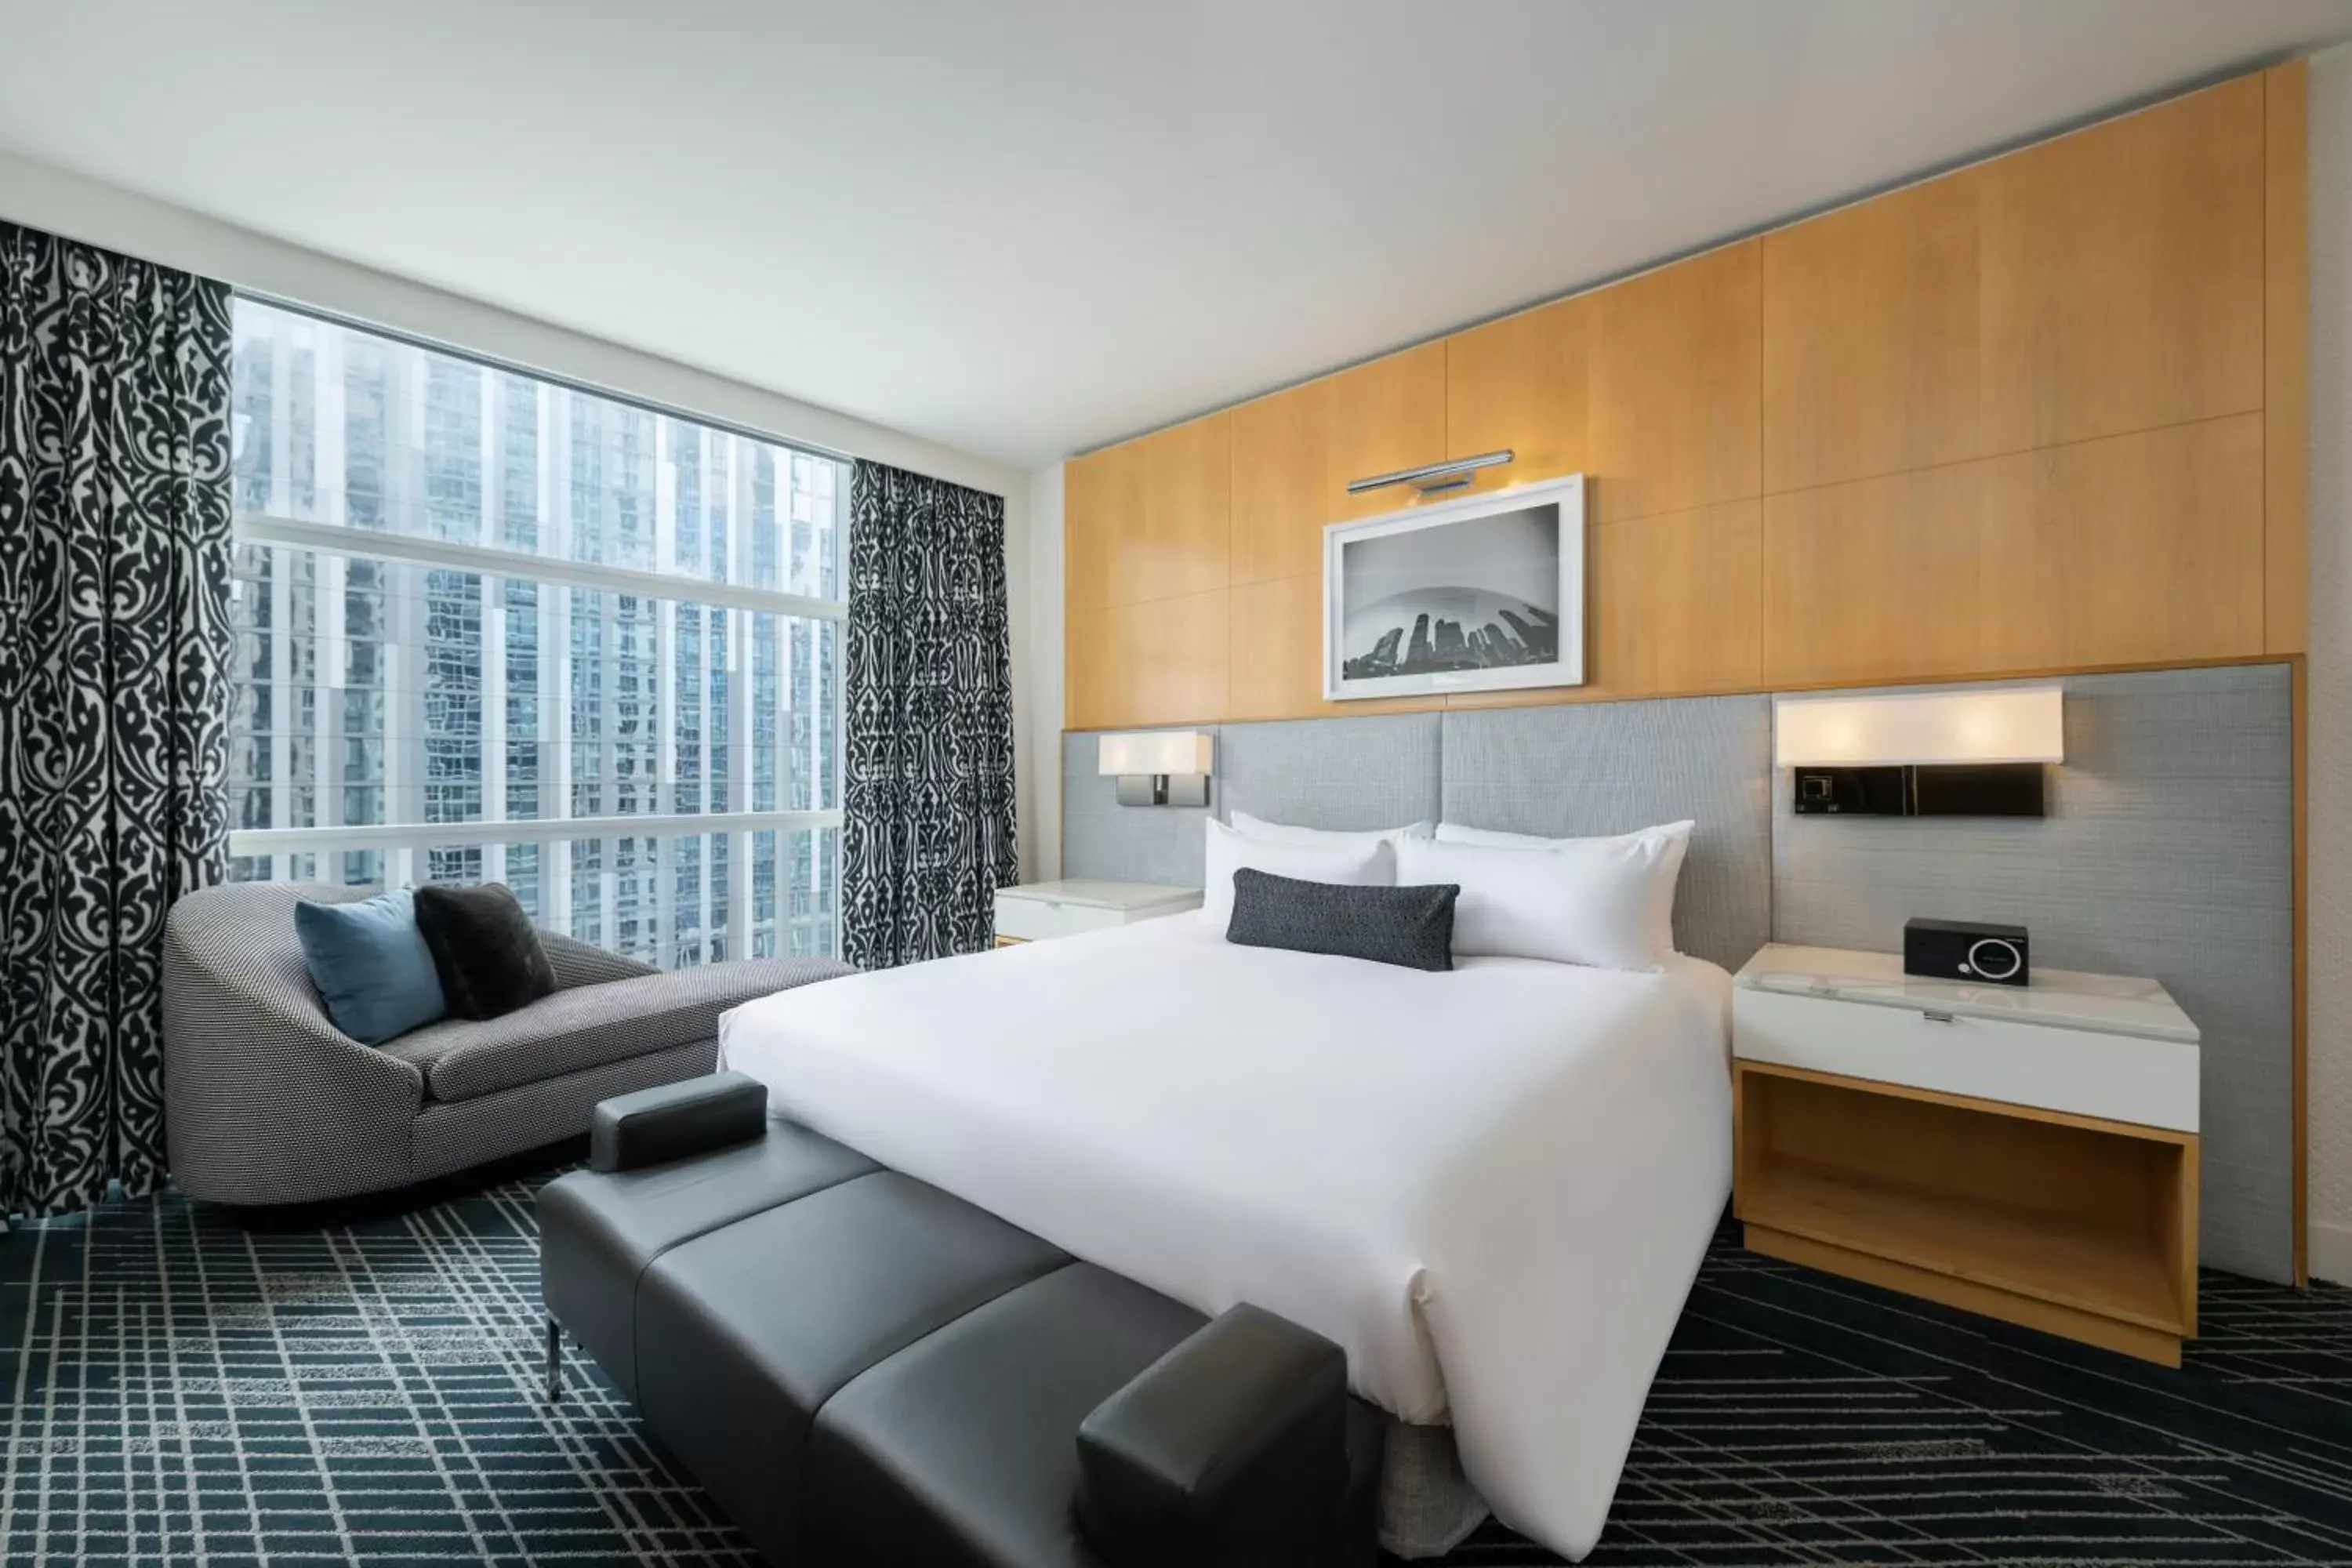 Superior King Room - single occupancy in Sofitel Chicago Magnificent Mile